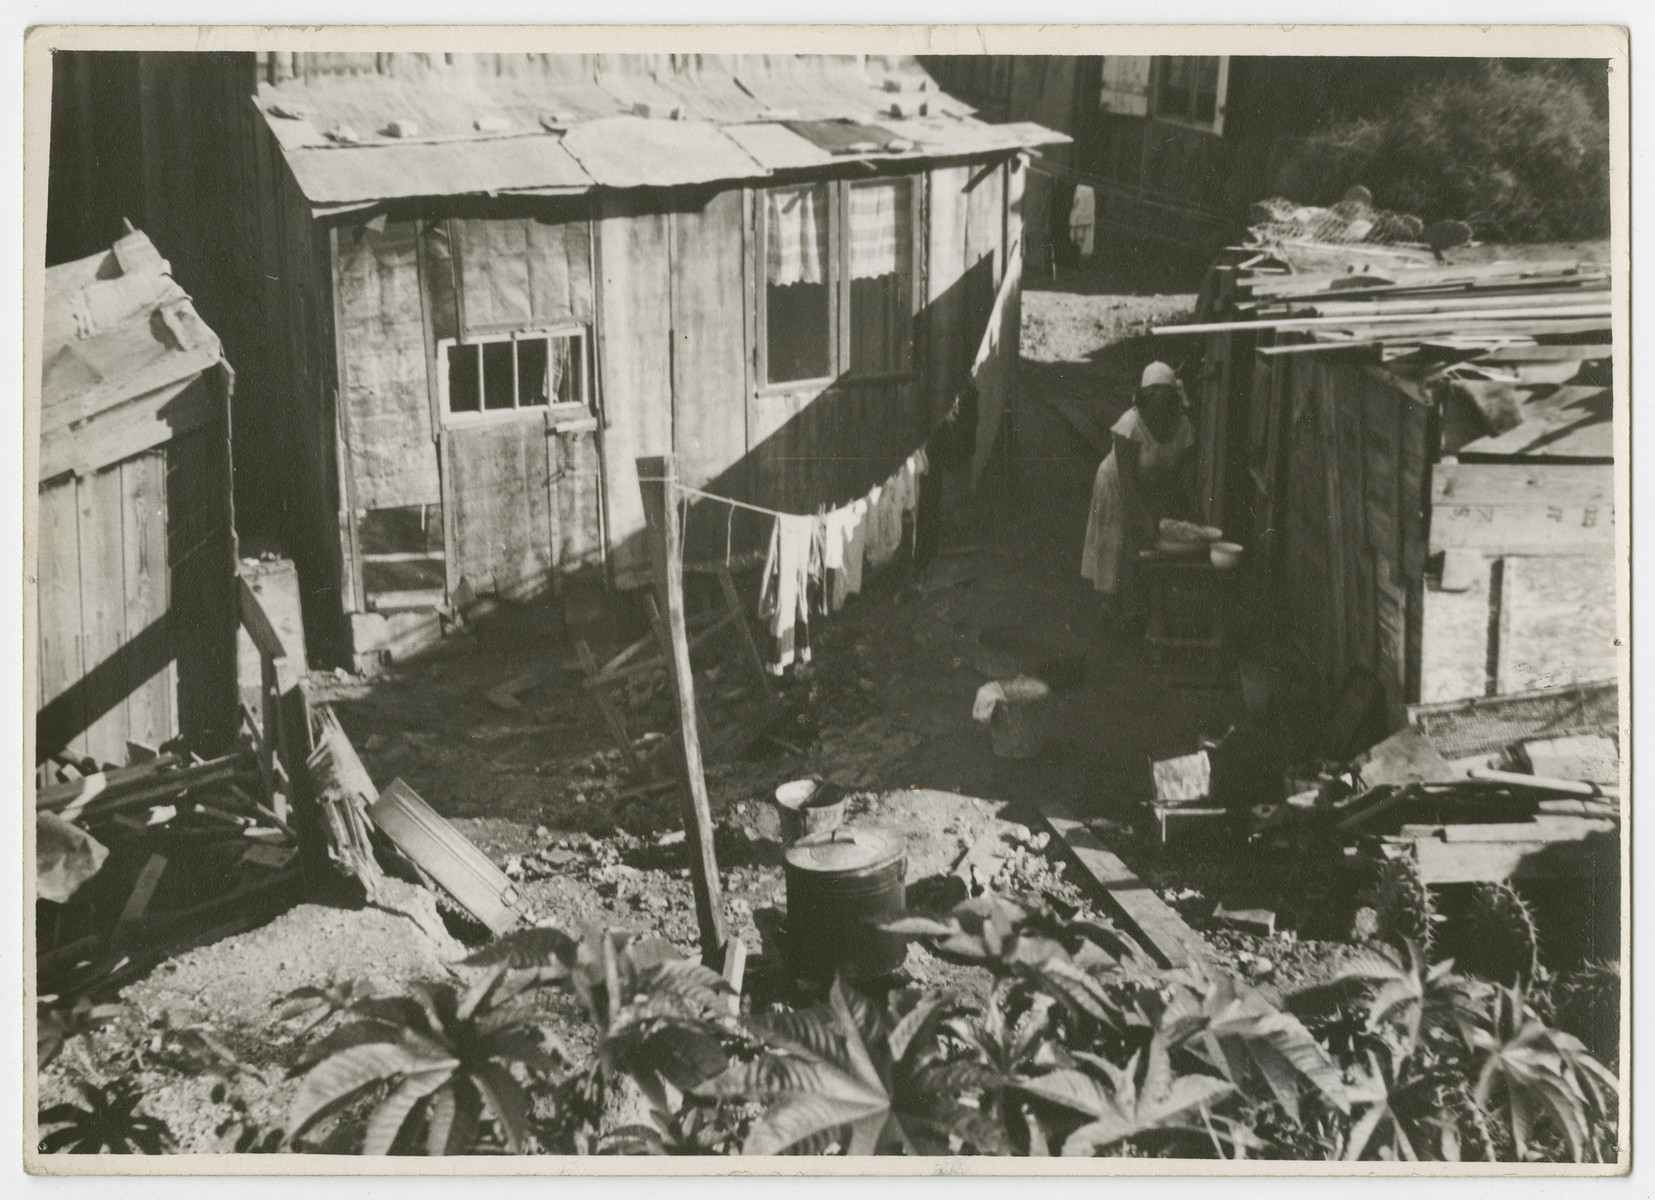 View of a workers' neighborhood "Shuhunat Haoved" in Tel Aviv.

Photograph is used on page 174 of Robert Gessner's "Some of My Best Friends are Jews." The pencil inscription on the back of the photograph reads, "Jewish."